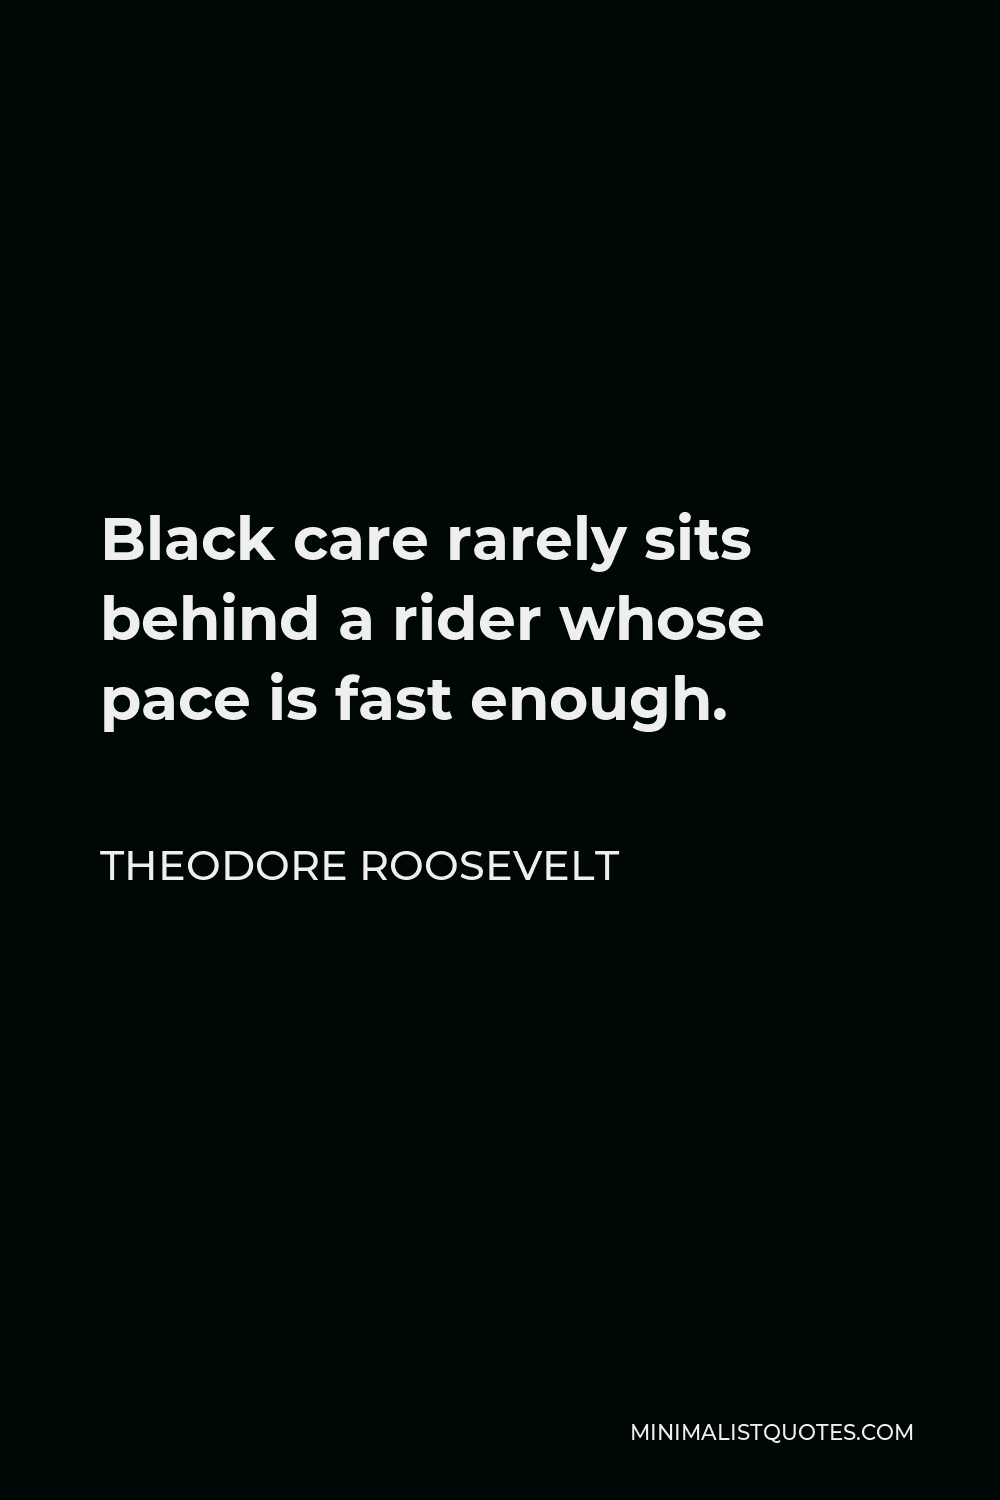 Theodore Roosevelt Quote - Black care rarely sits behind a rider whose pace is fast enough.